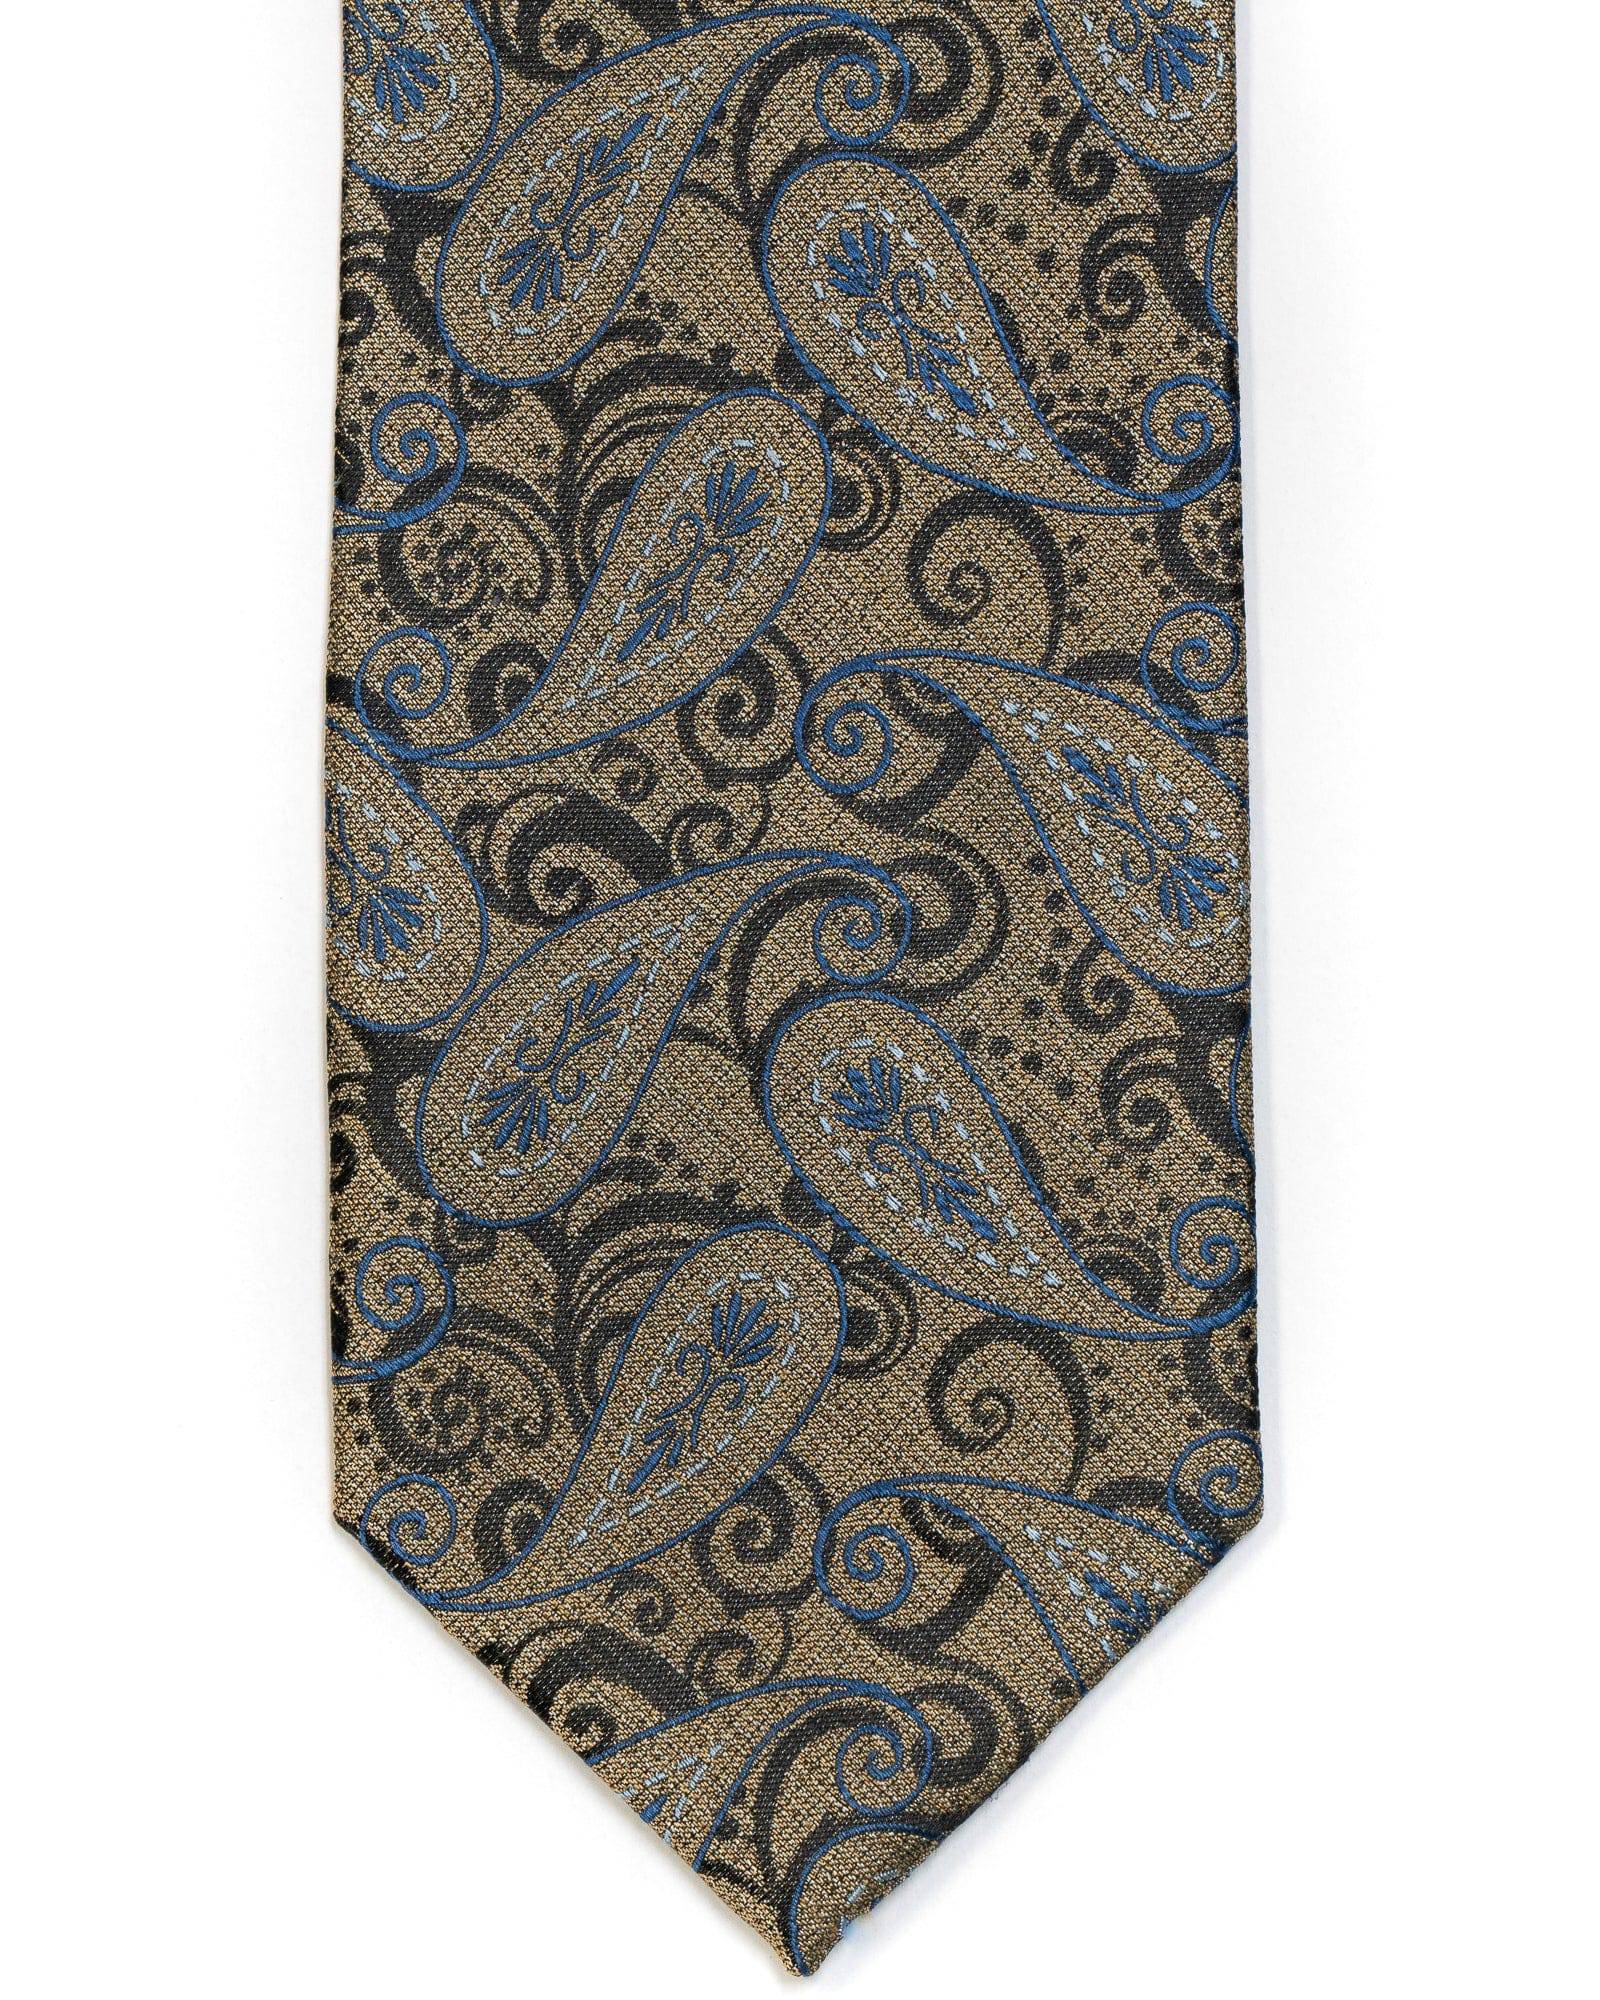 Silk Tie In Gold With Black Paisley Design - Rainwater's Men's Clothing and Tuxedo Rental